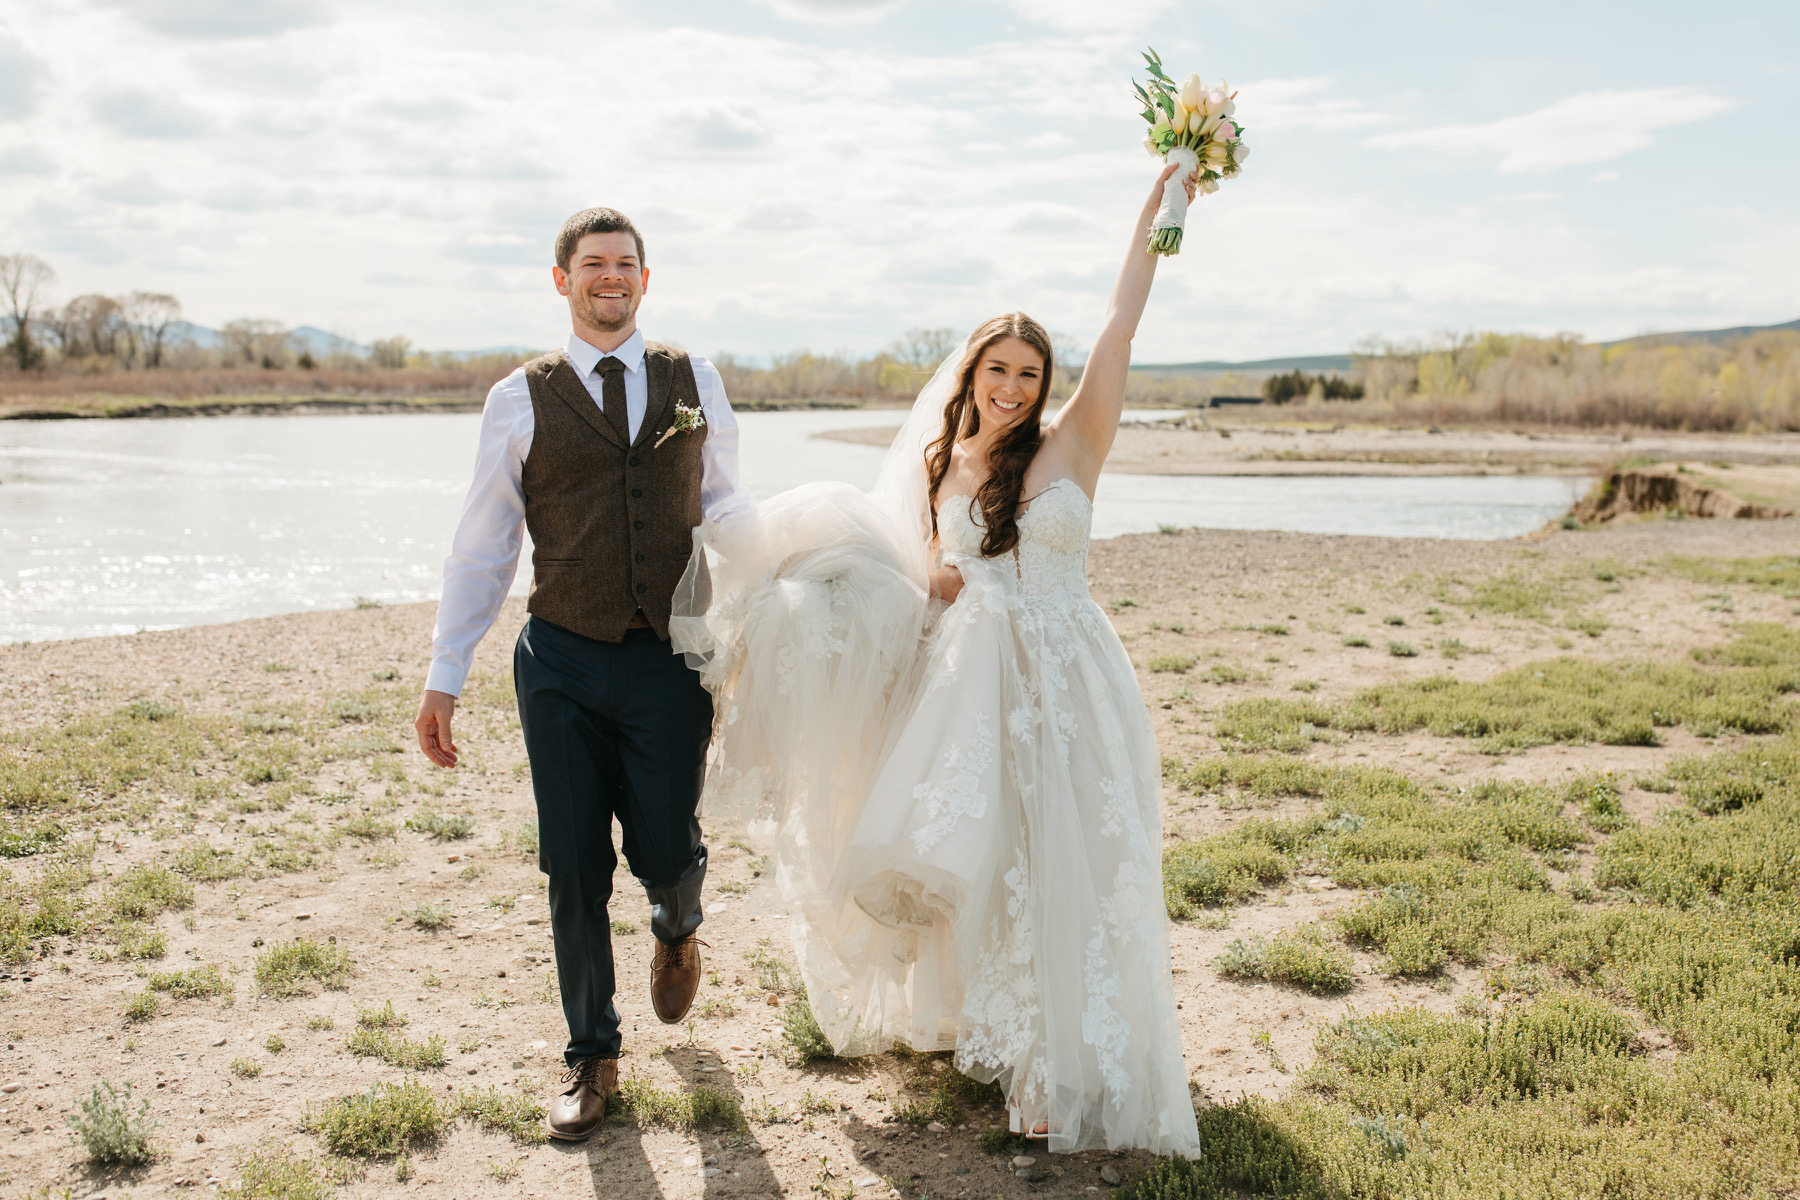 image shows bride and groom walking towards photographer. Bride holds her bouquet up in the air while groom helps bride carry her dress train